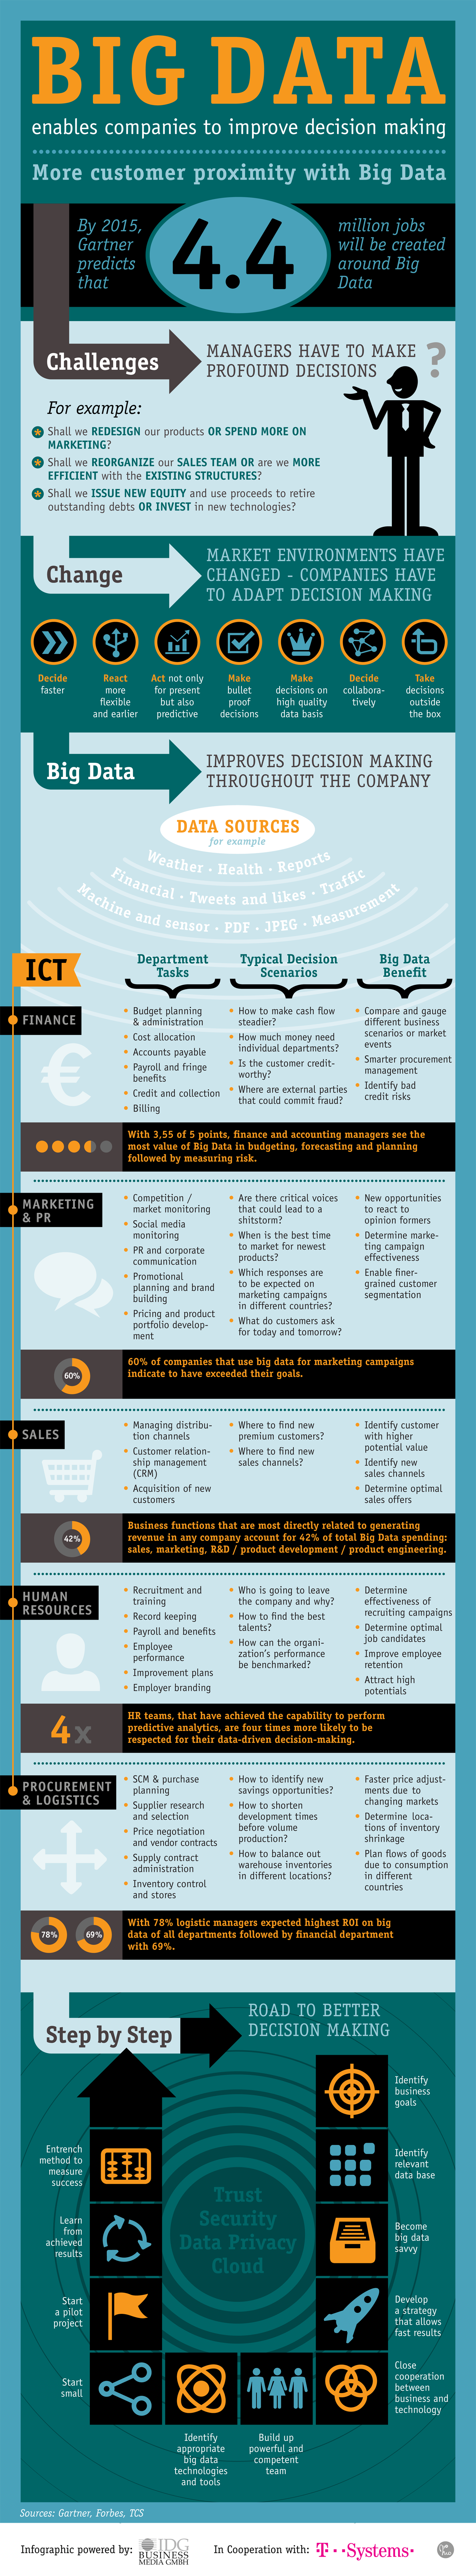 Big Data Enables Companies To Improve Decision Making - Infographic